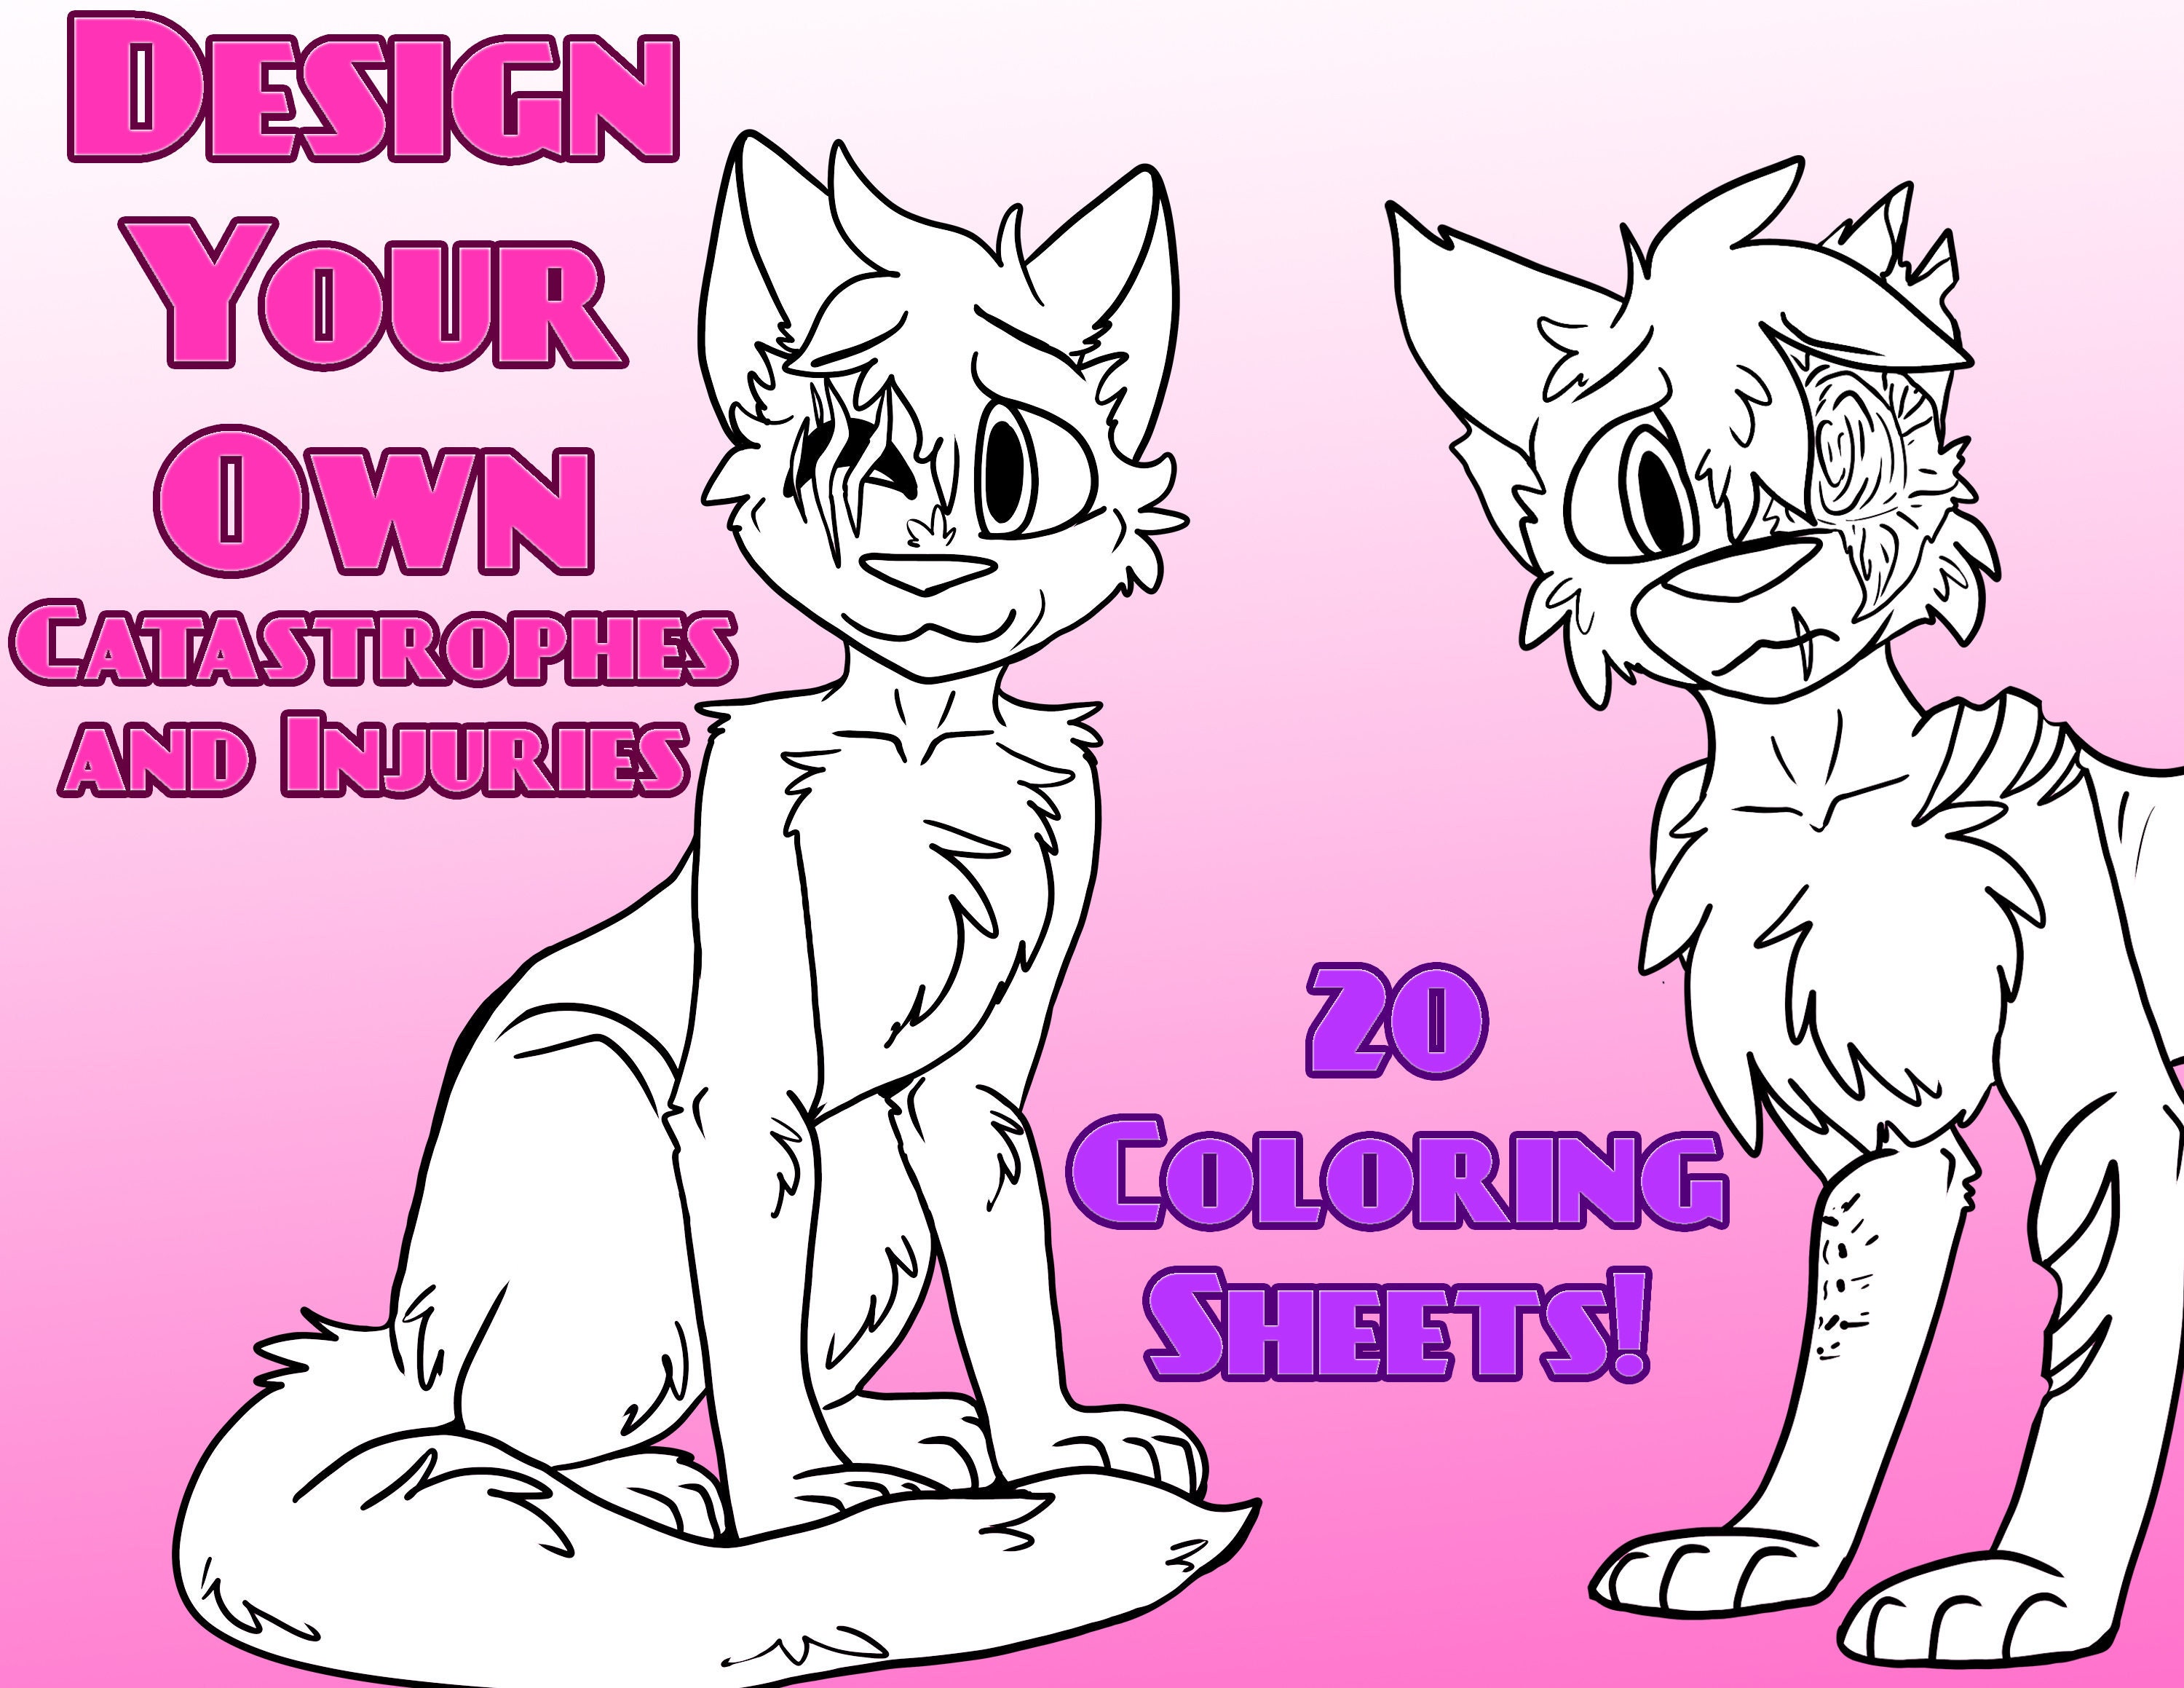 How to Design Your Own Warrior Cats Camps and Kittens! 